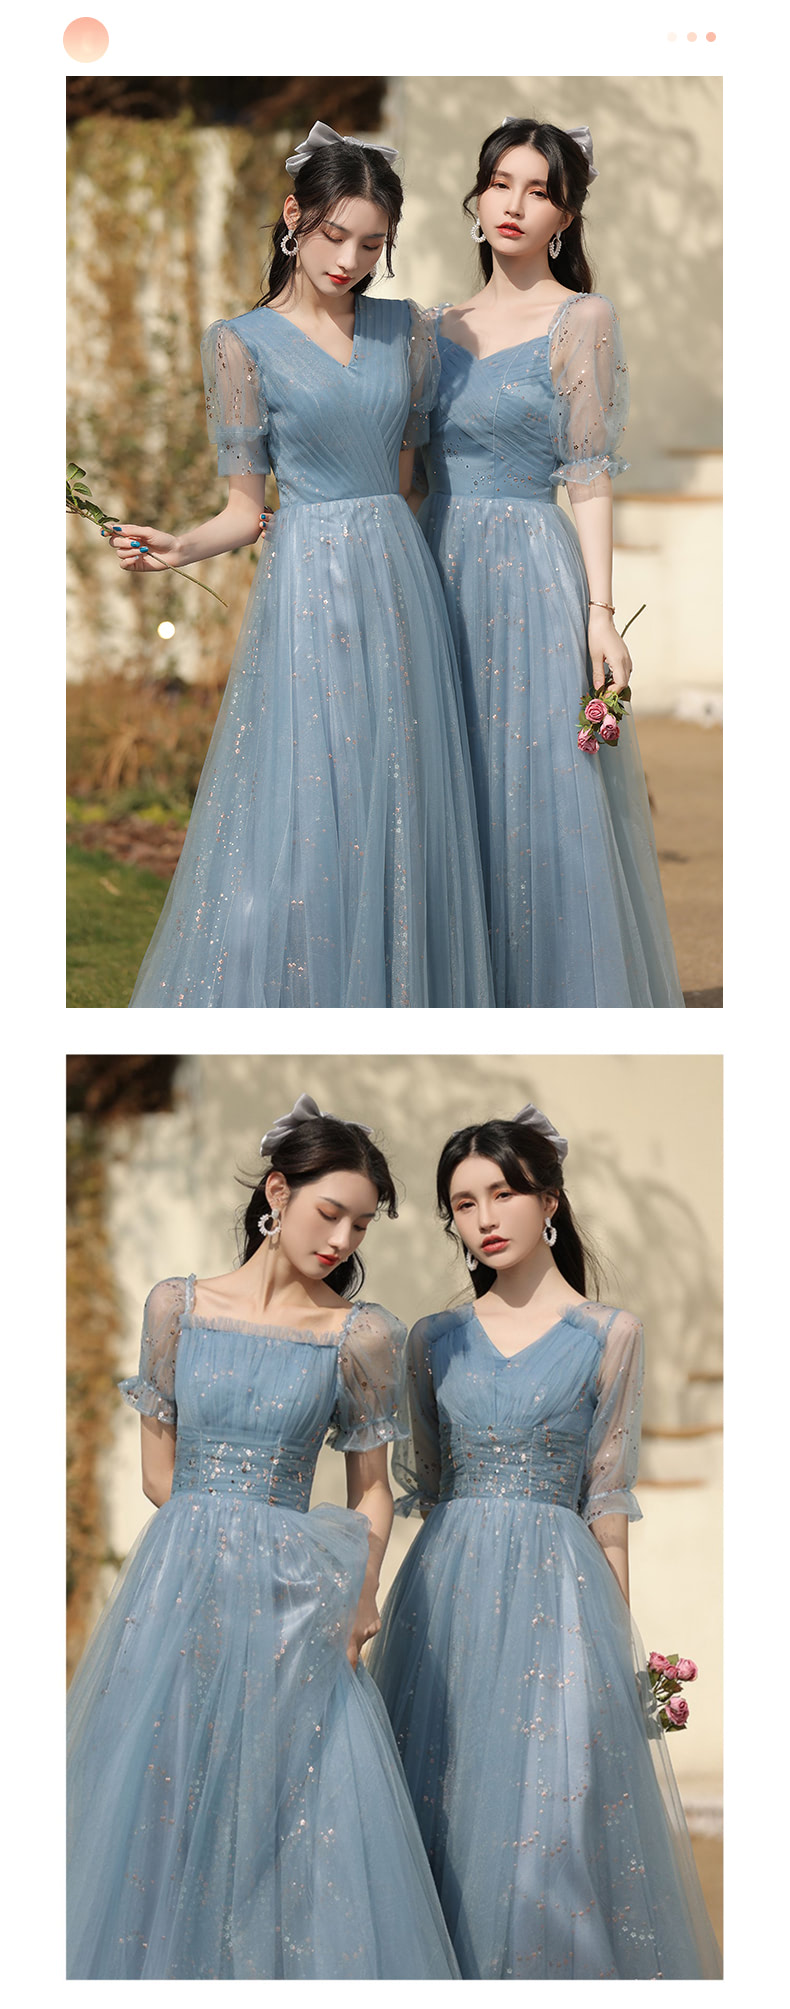 Blue-Bridesmaid-Dress-Wedding-Female-Guest-Gown-with-4-Styles12.jpg